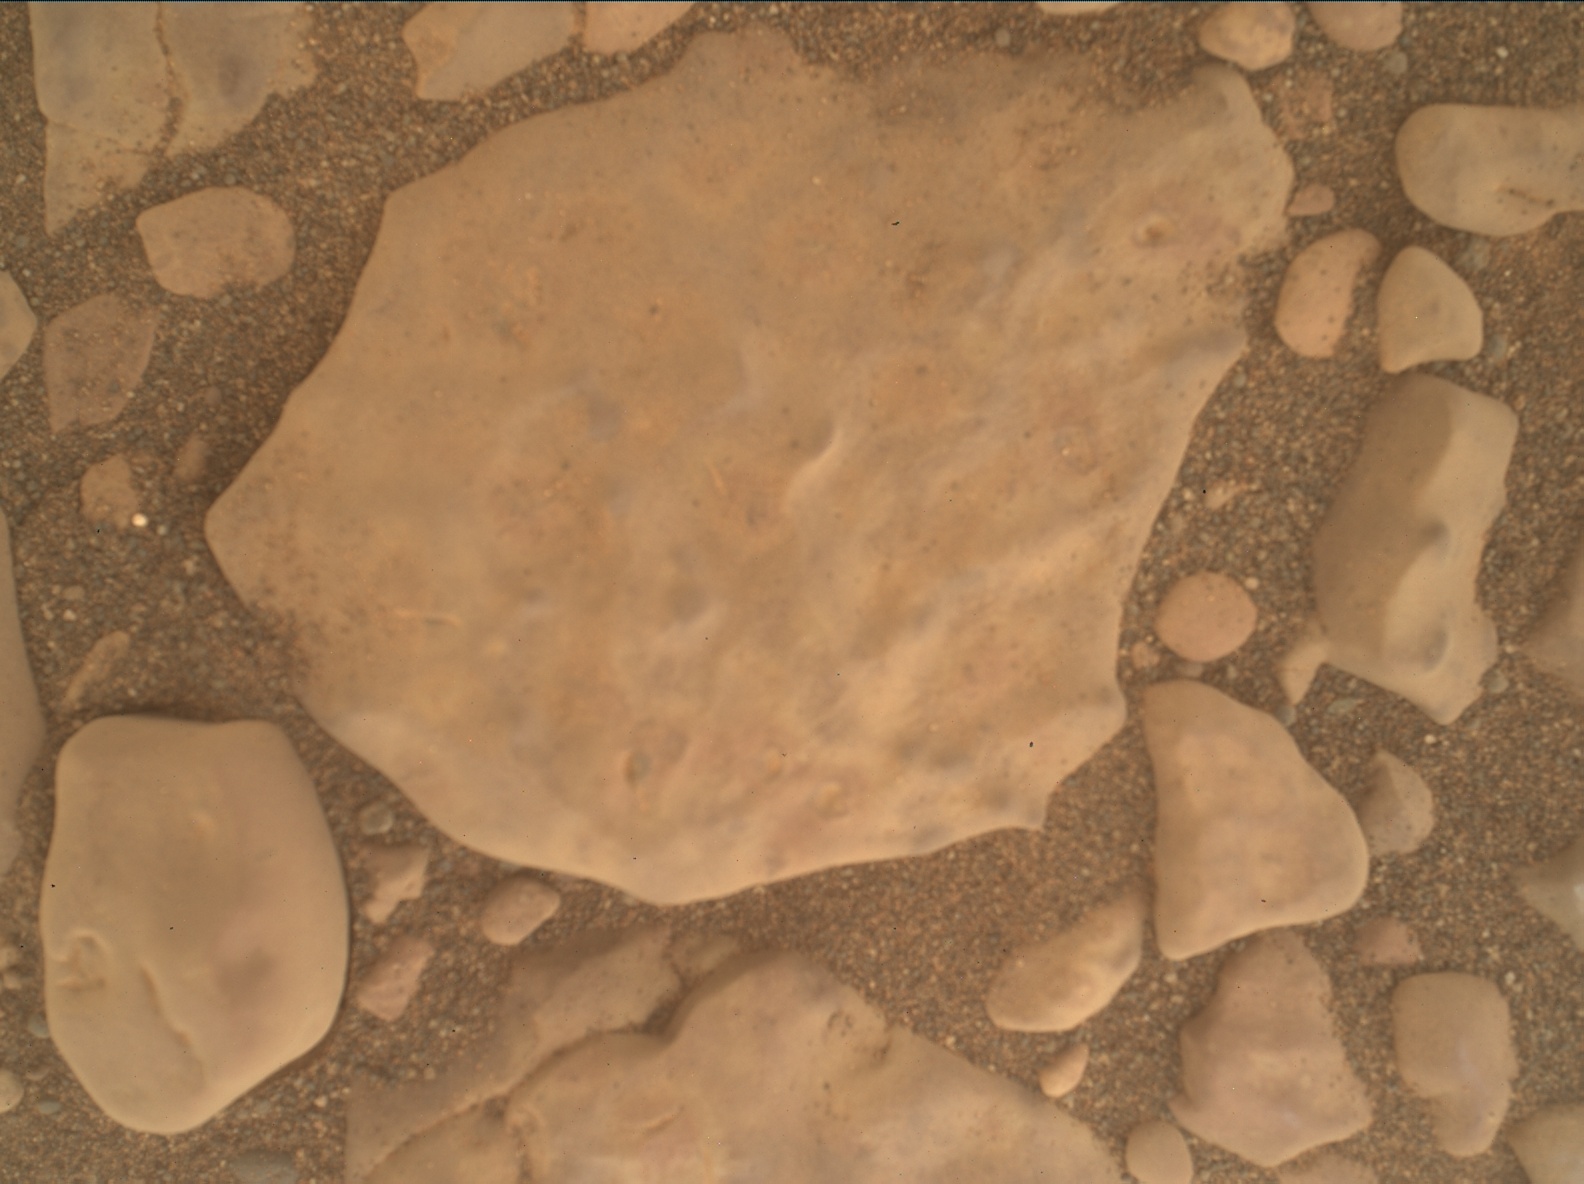 Nasa's Mars rover Curiosity acquired this image using its Mars Hand Lens Imager (MAHLI) on Sol 2972